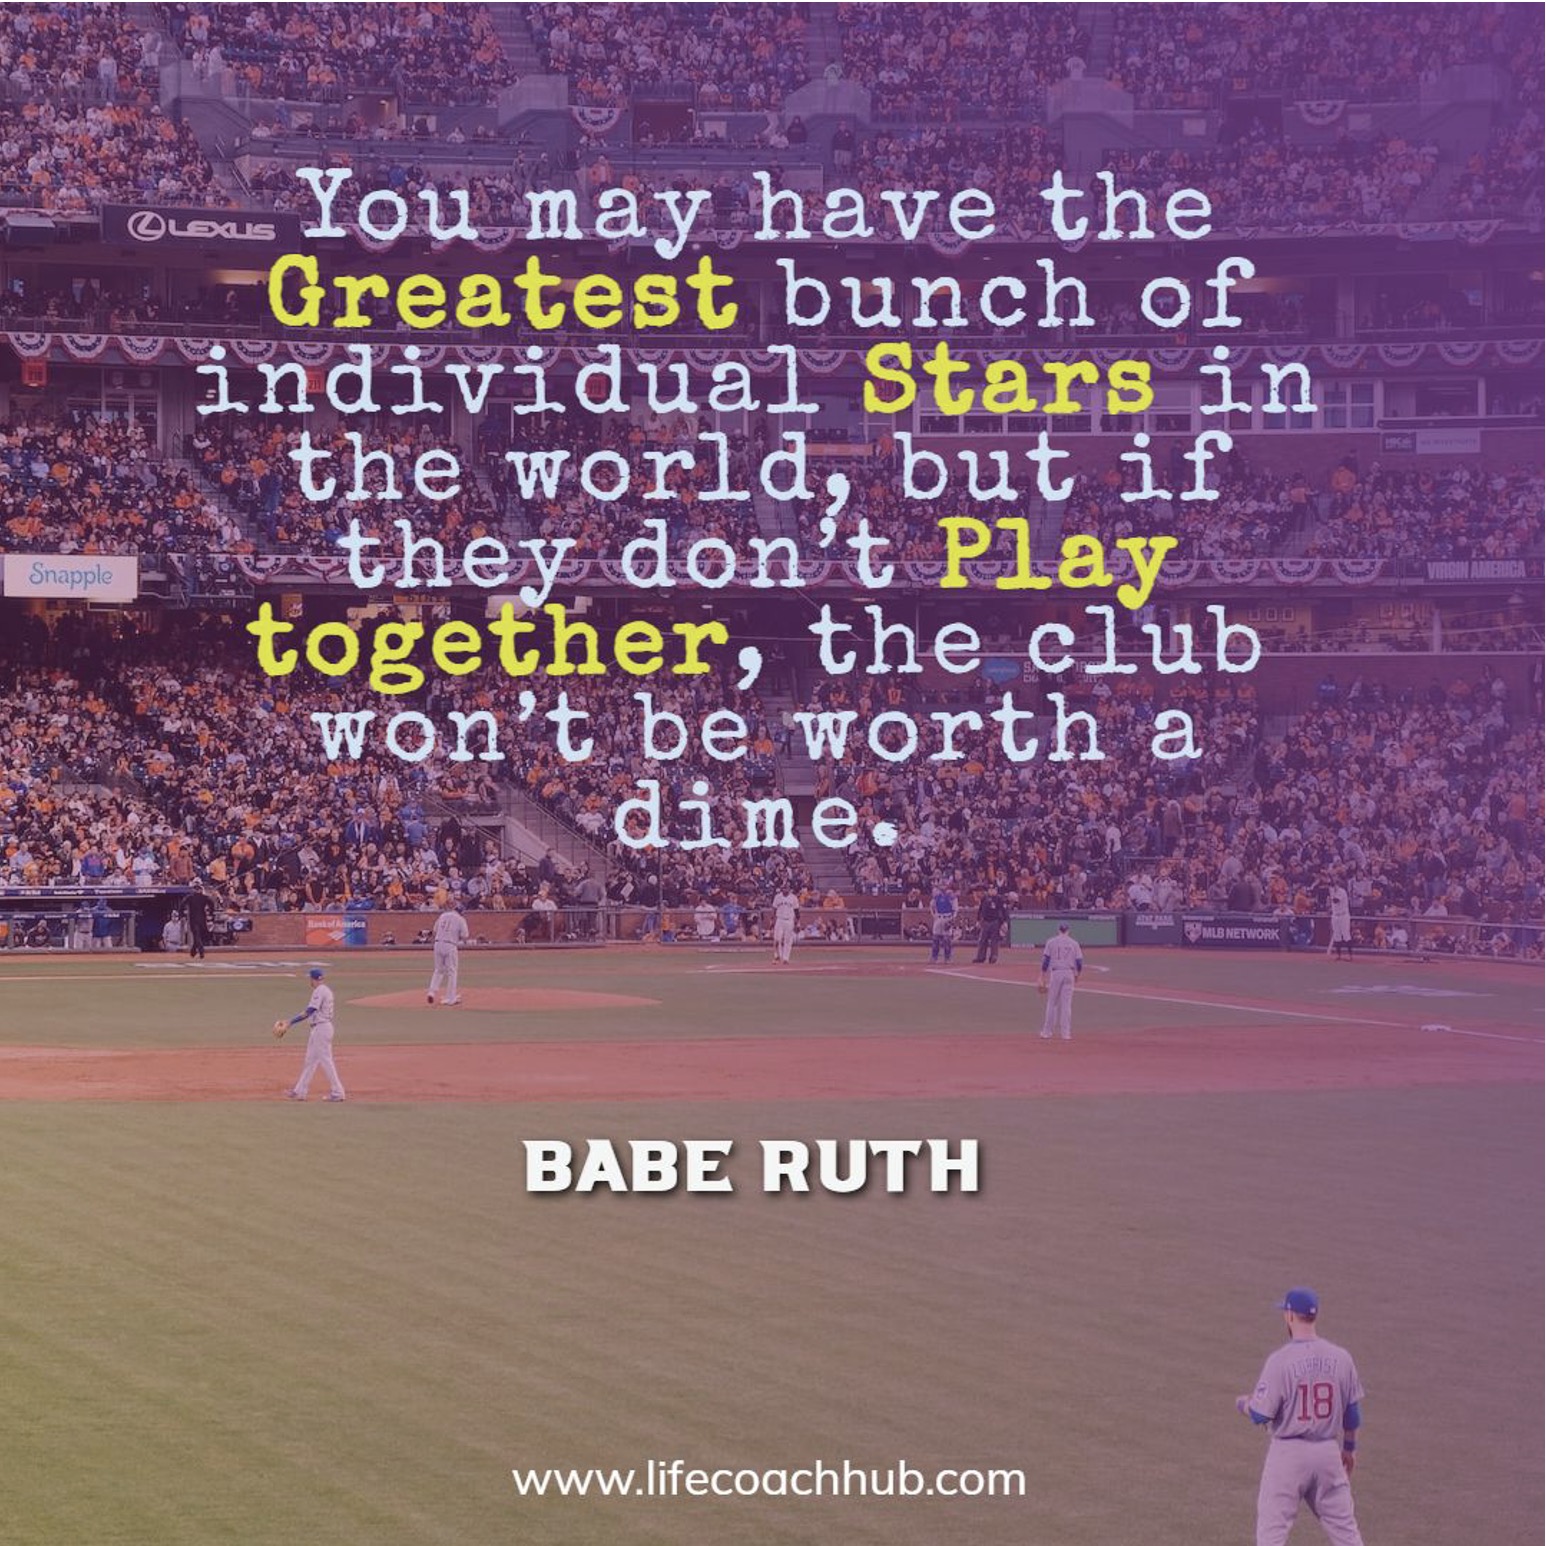 https://www.lifecoachhub.com/files/images/You-may-have-the-greatest-individual-stars-don-t-olay-together-worth-dime-babe-ruth-business-coaching-quote